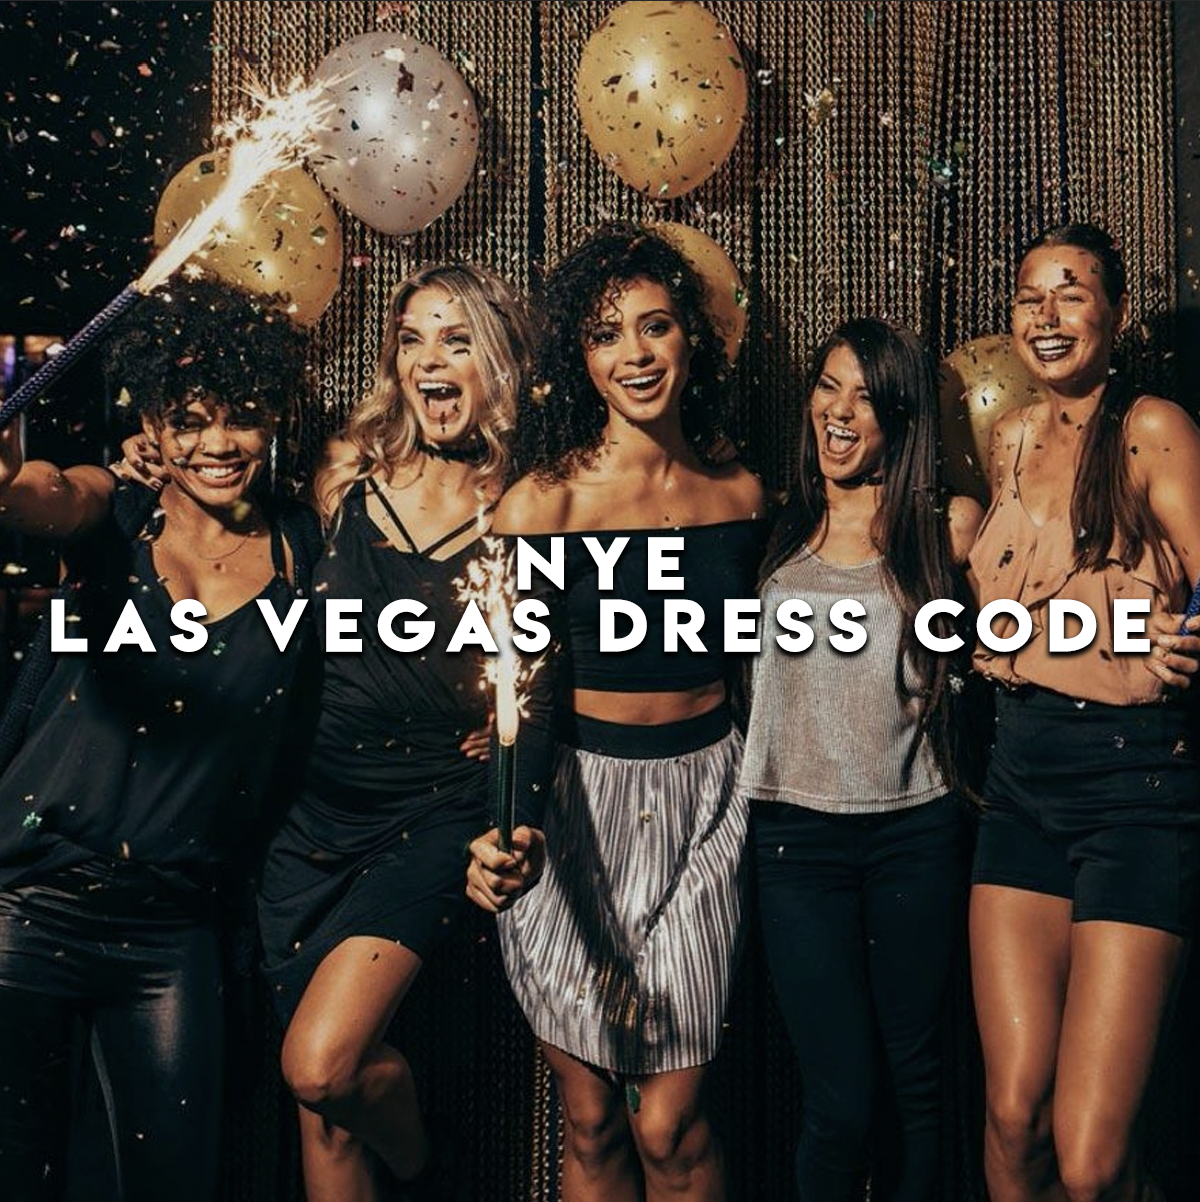 What to wear in Las Vegas and the nightclub dress code